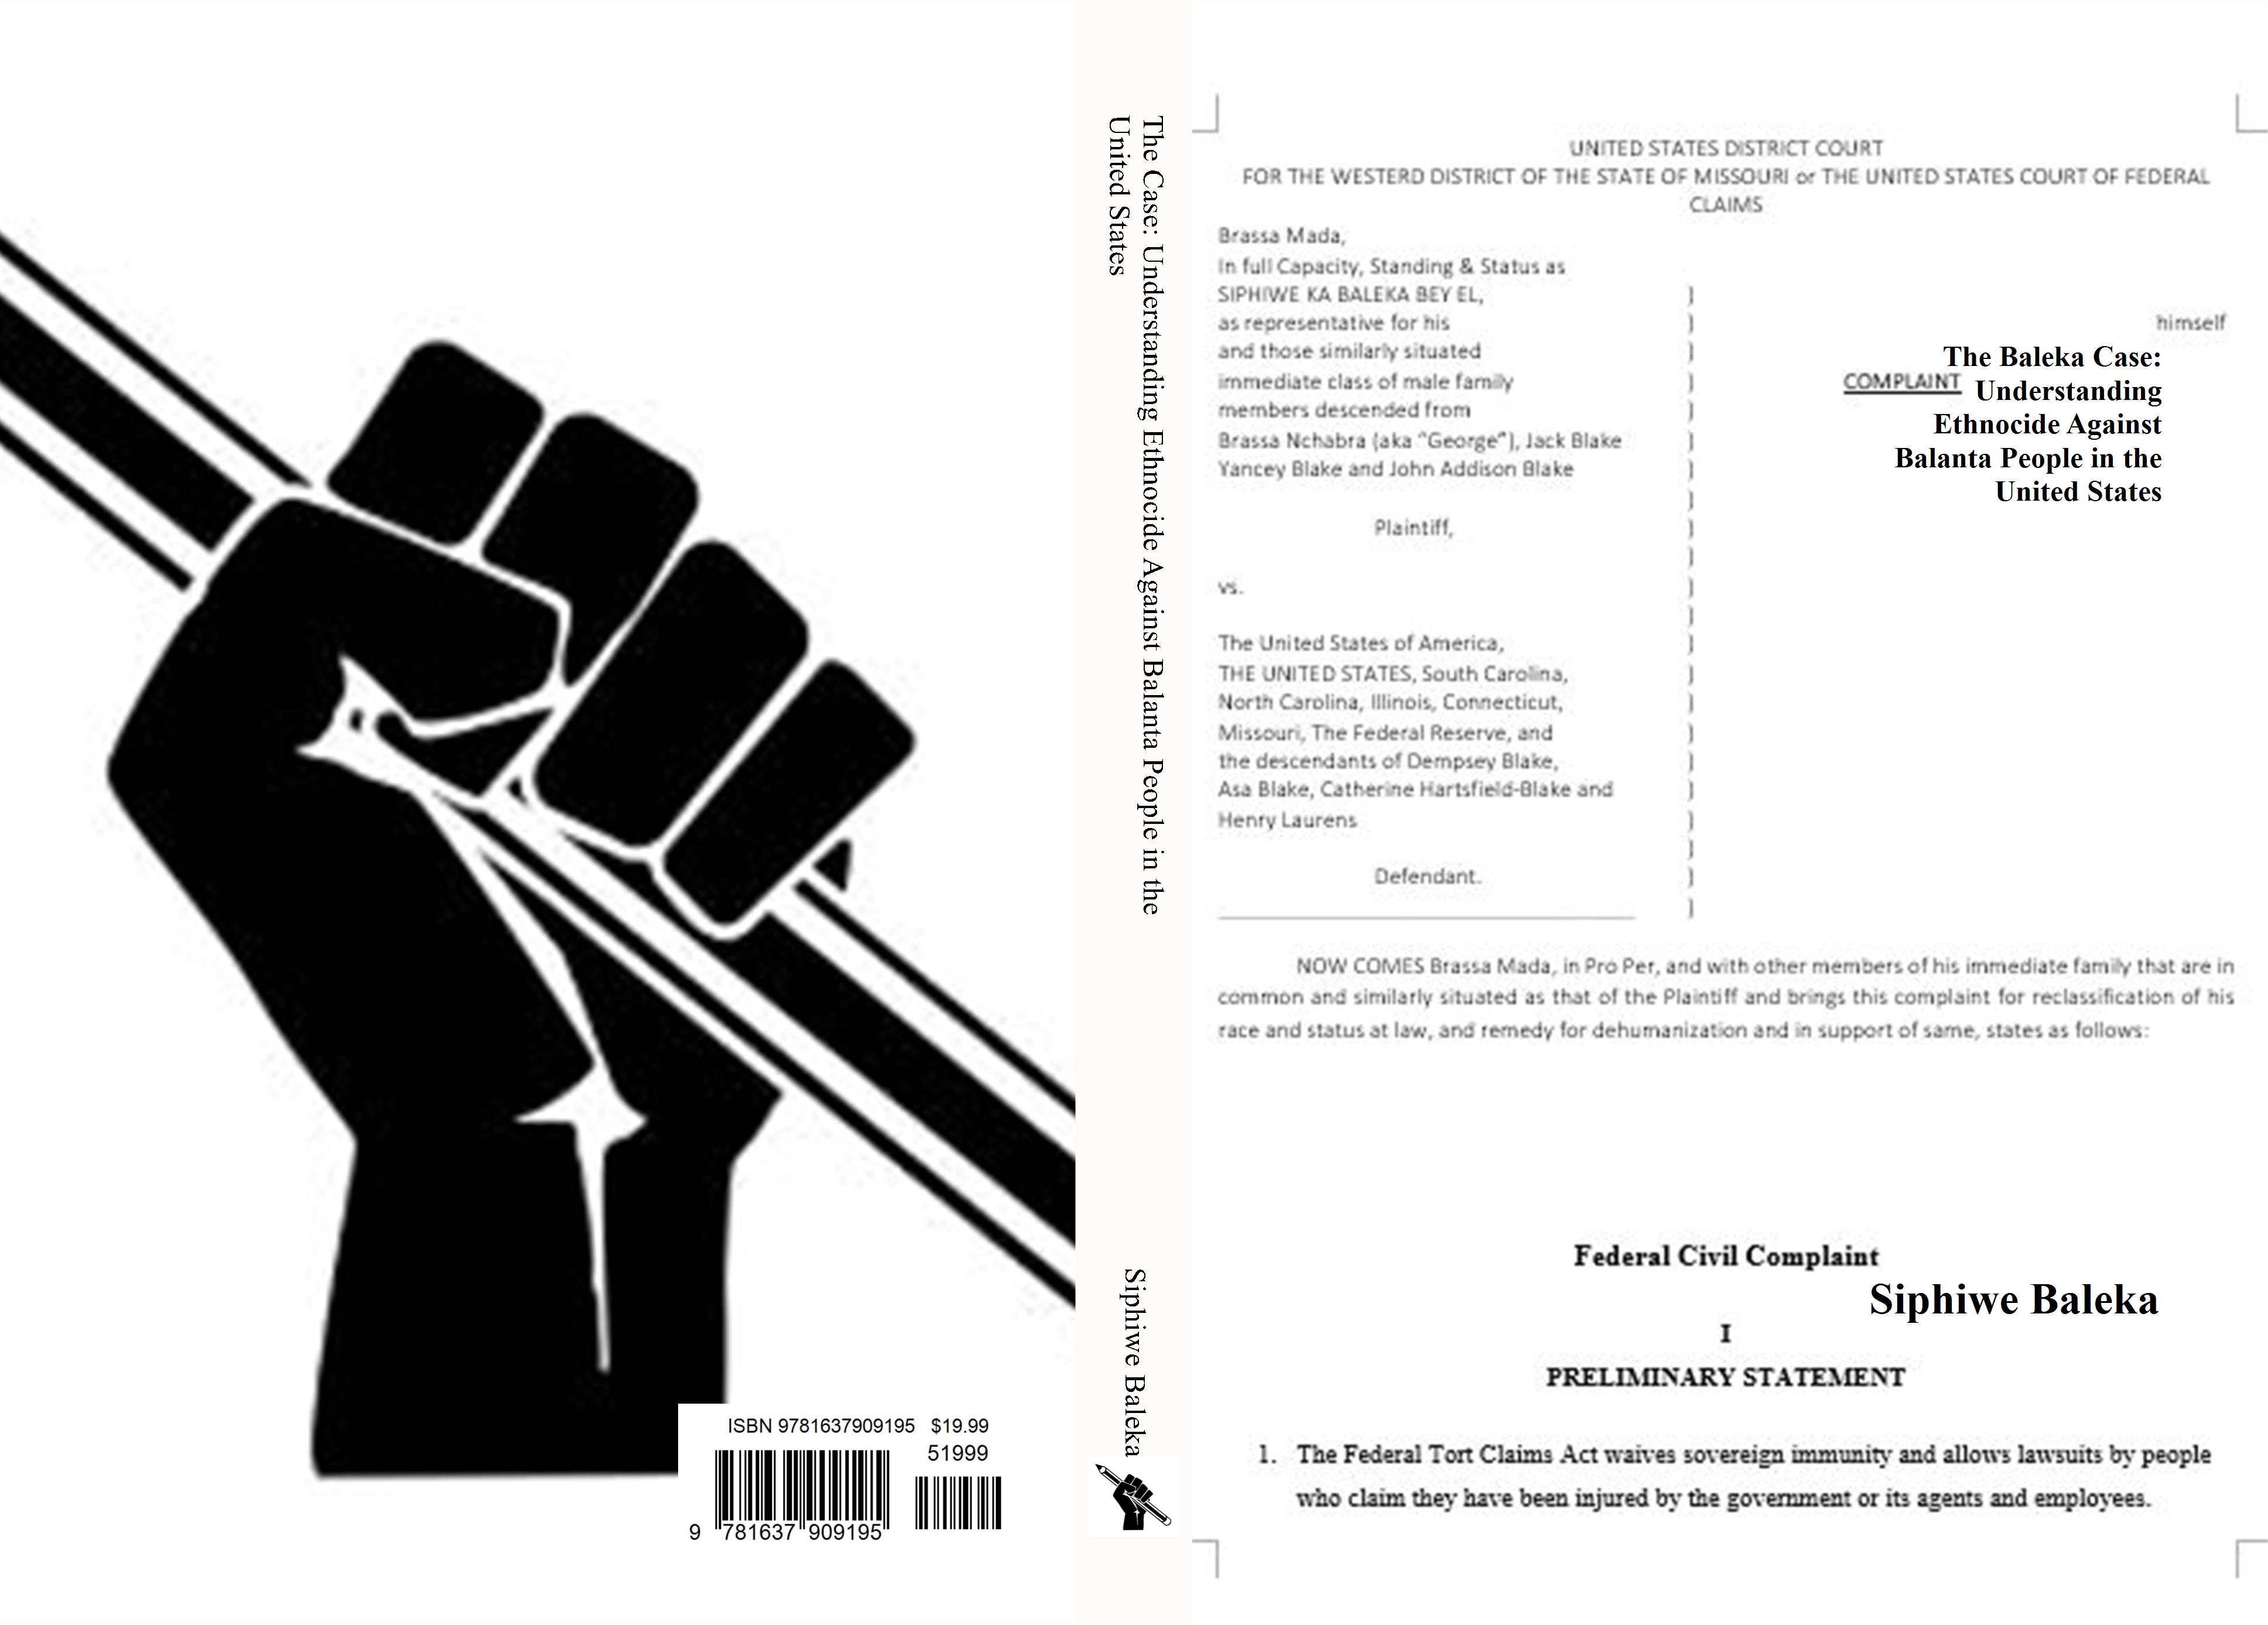 The Baleka Case: Understanding Ethnocide Against the Balanta People in the United States cover image